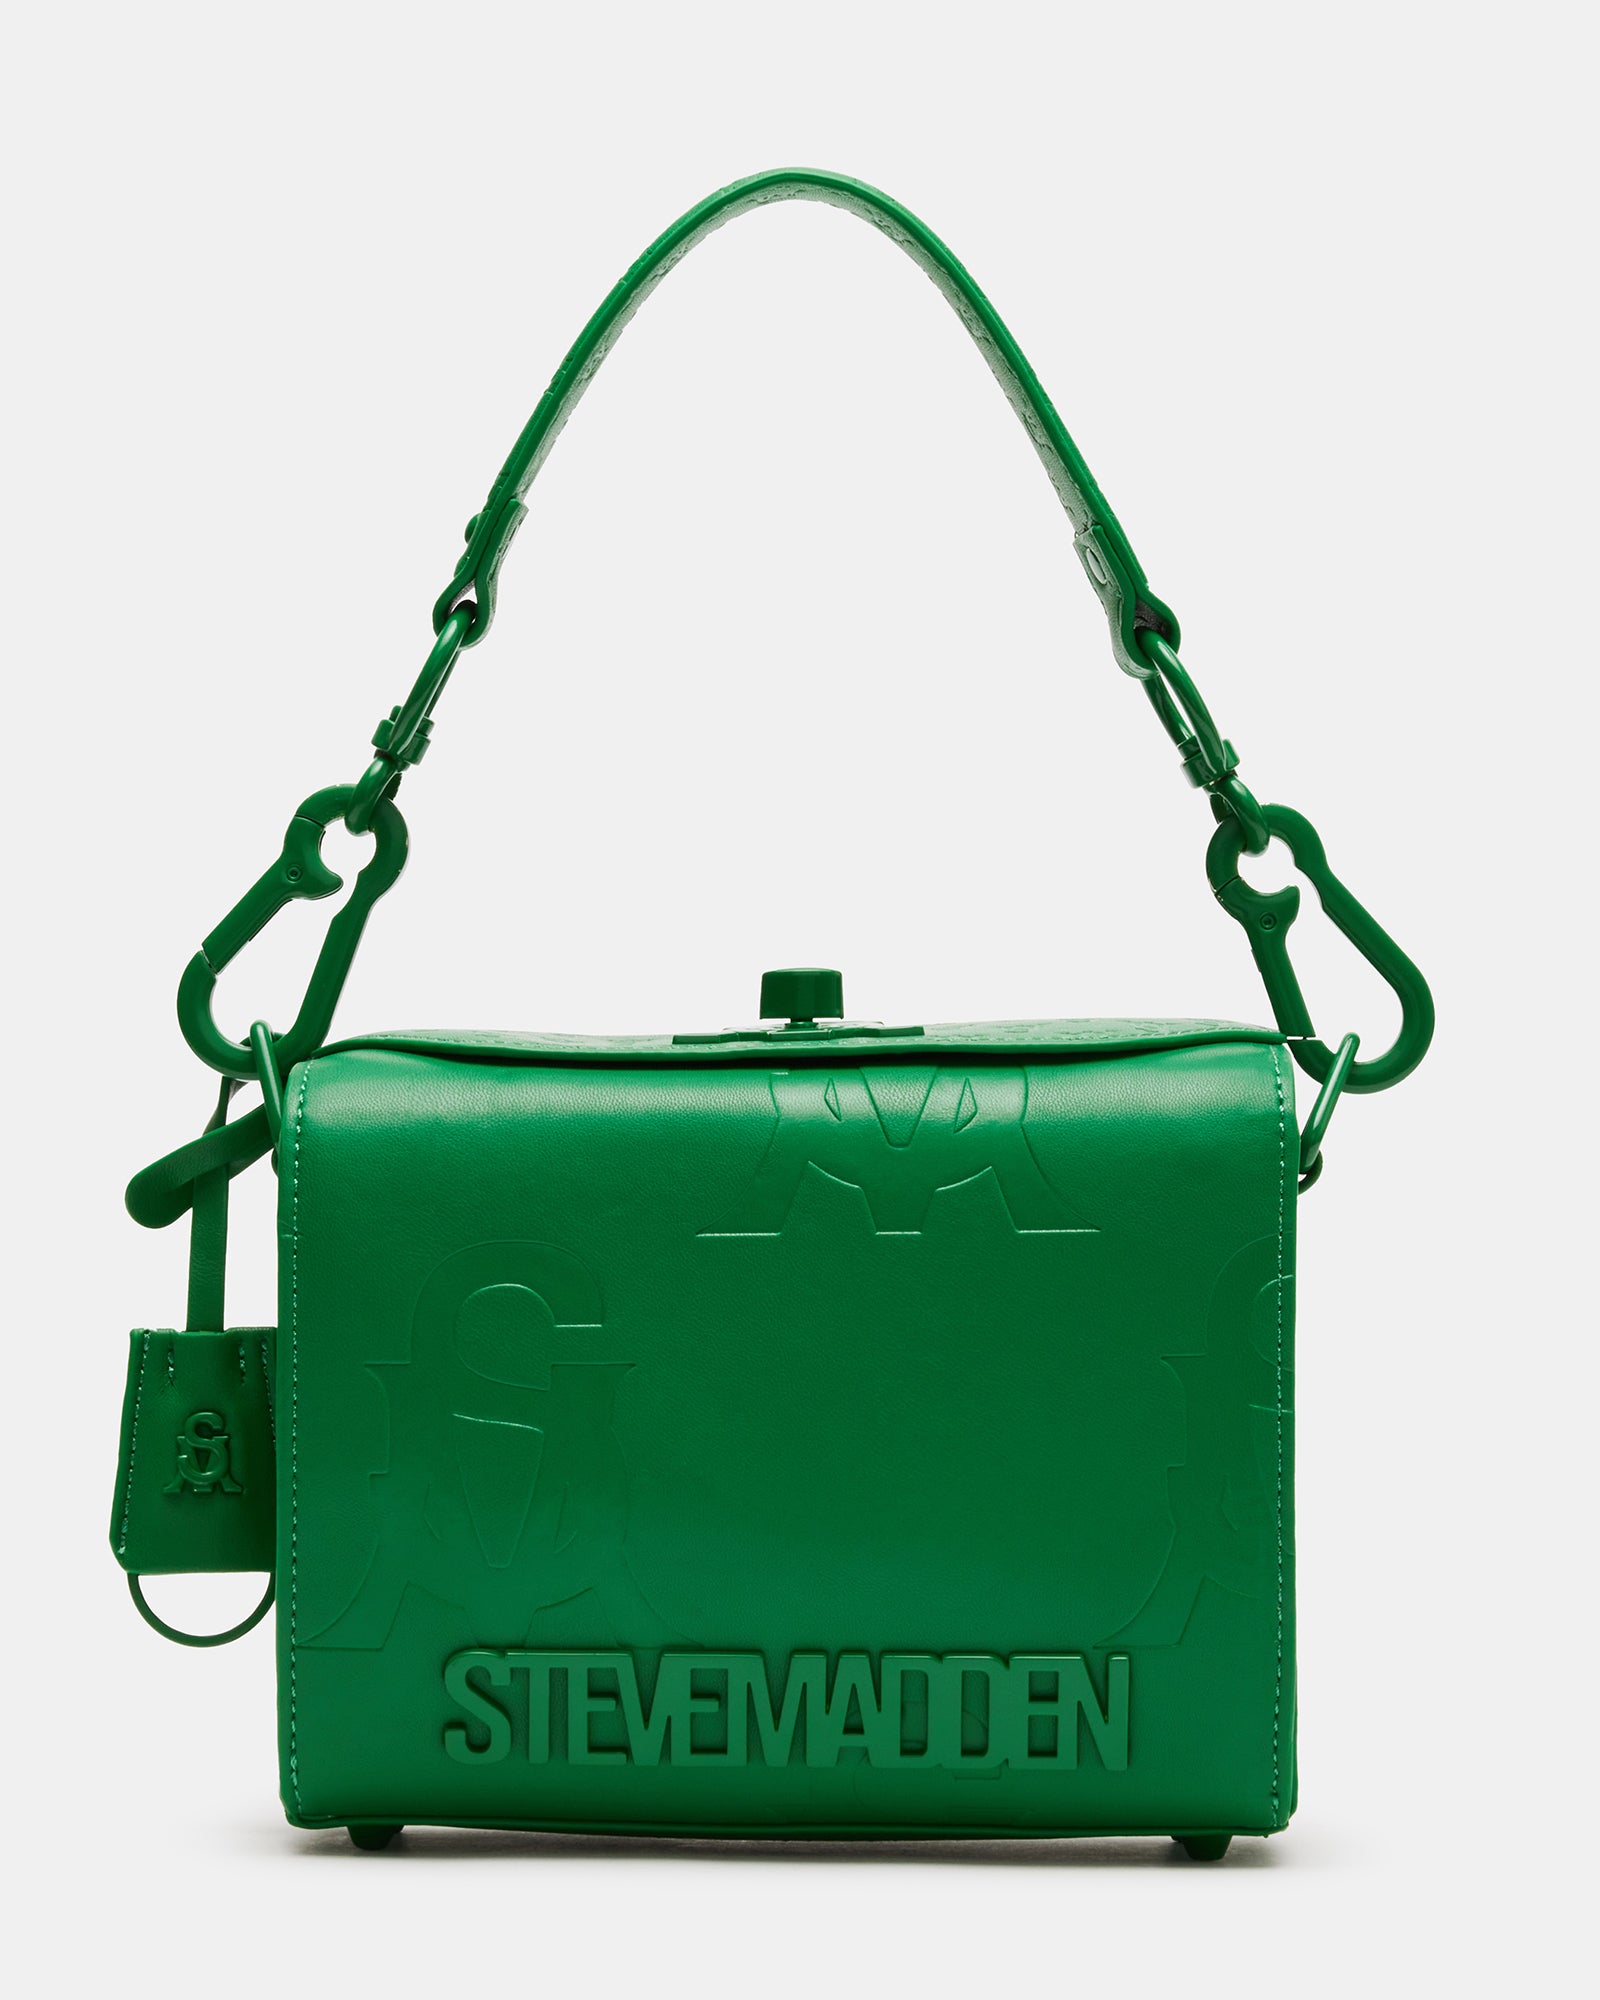 HOW TO STYLE A GREEN BAG?